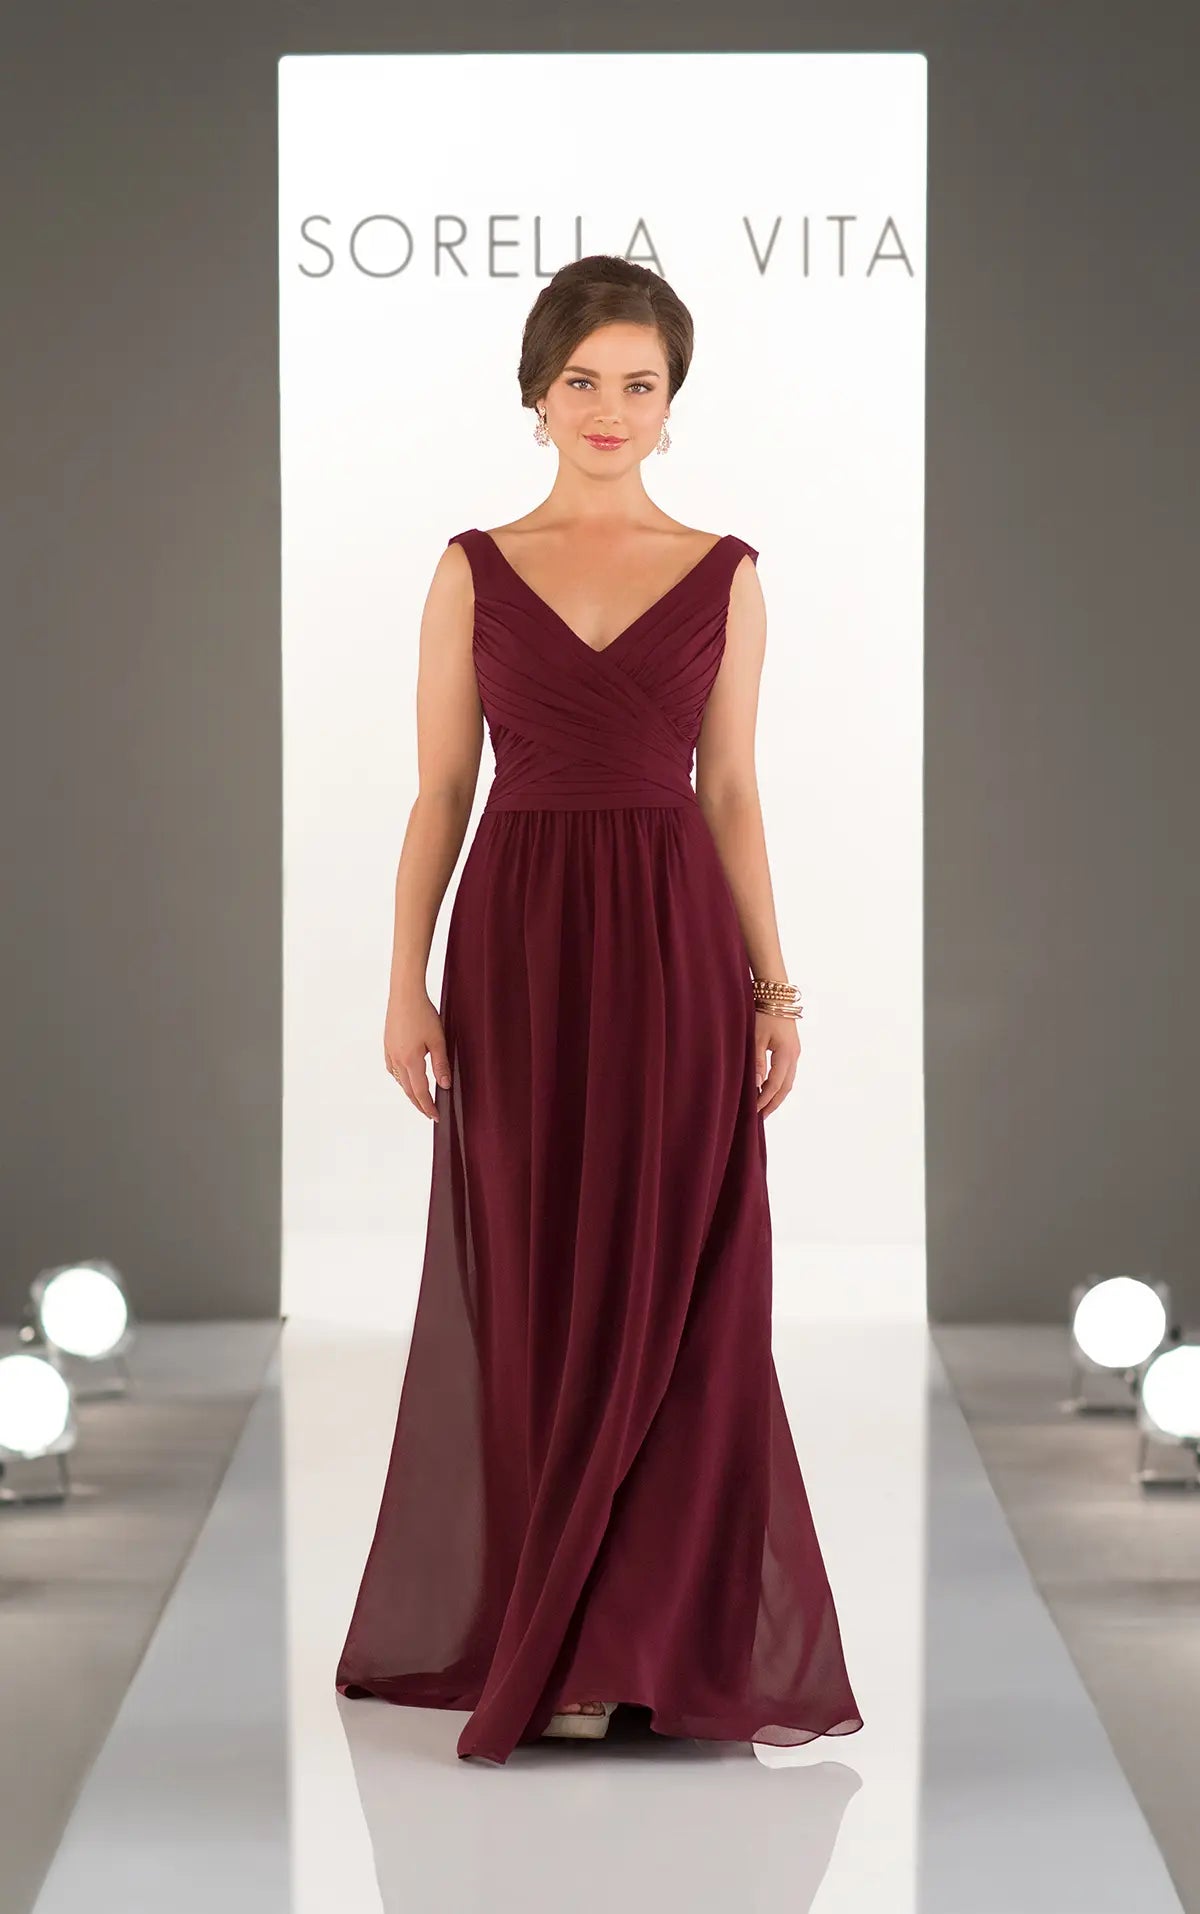 Bridesmaid Dress with Double Banded Waist